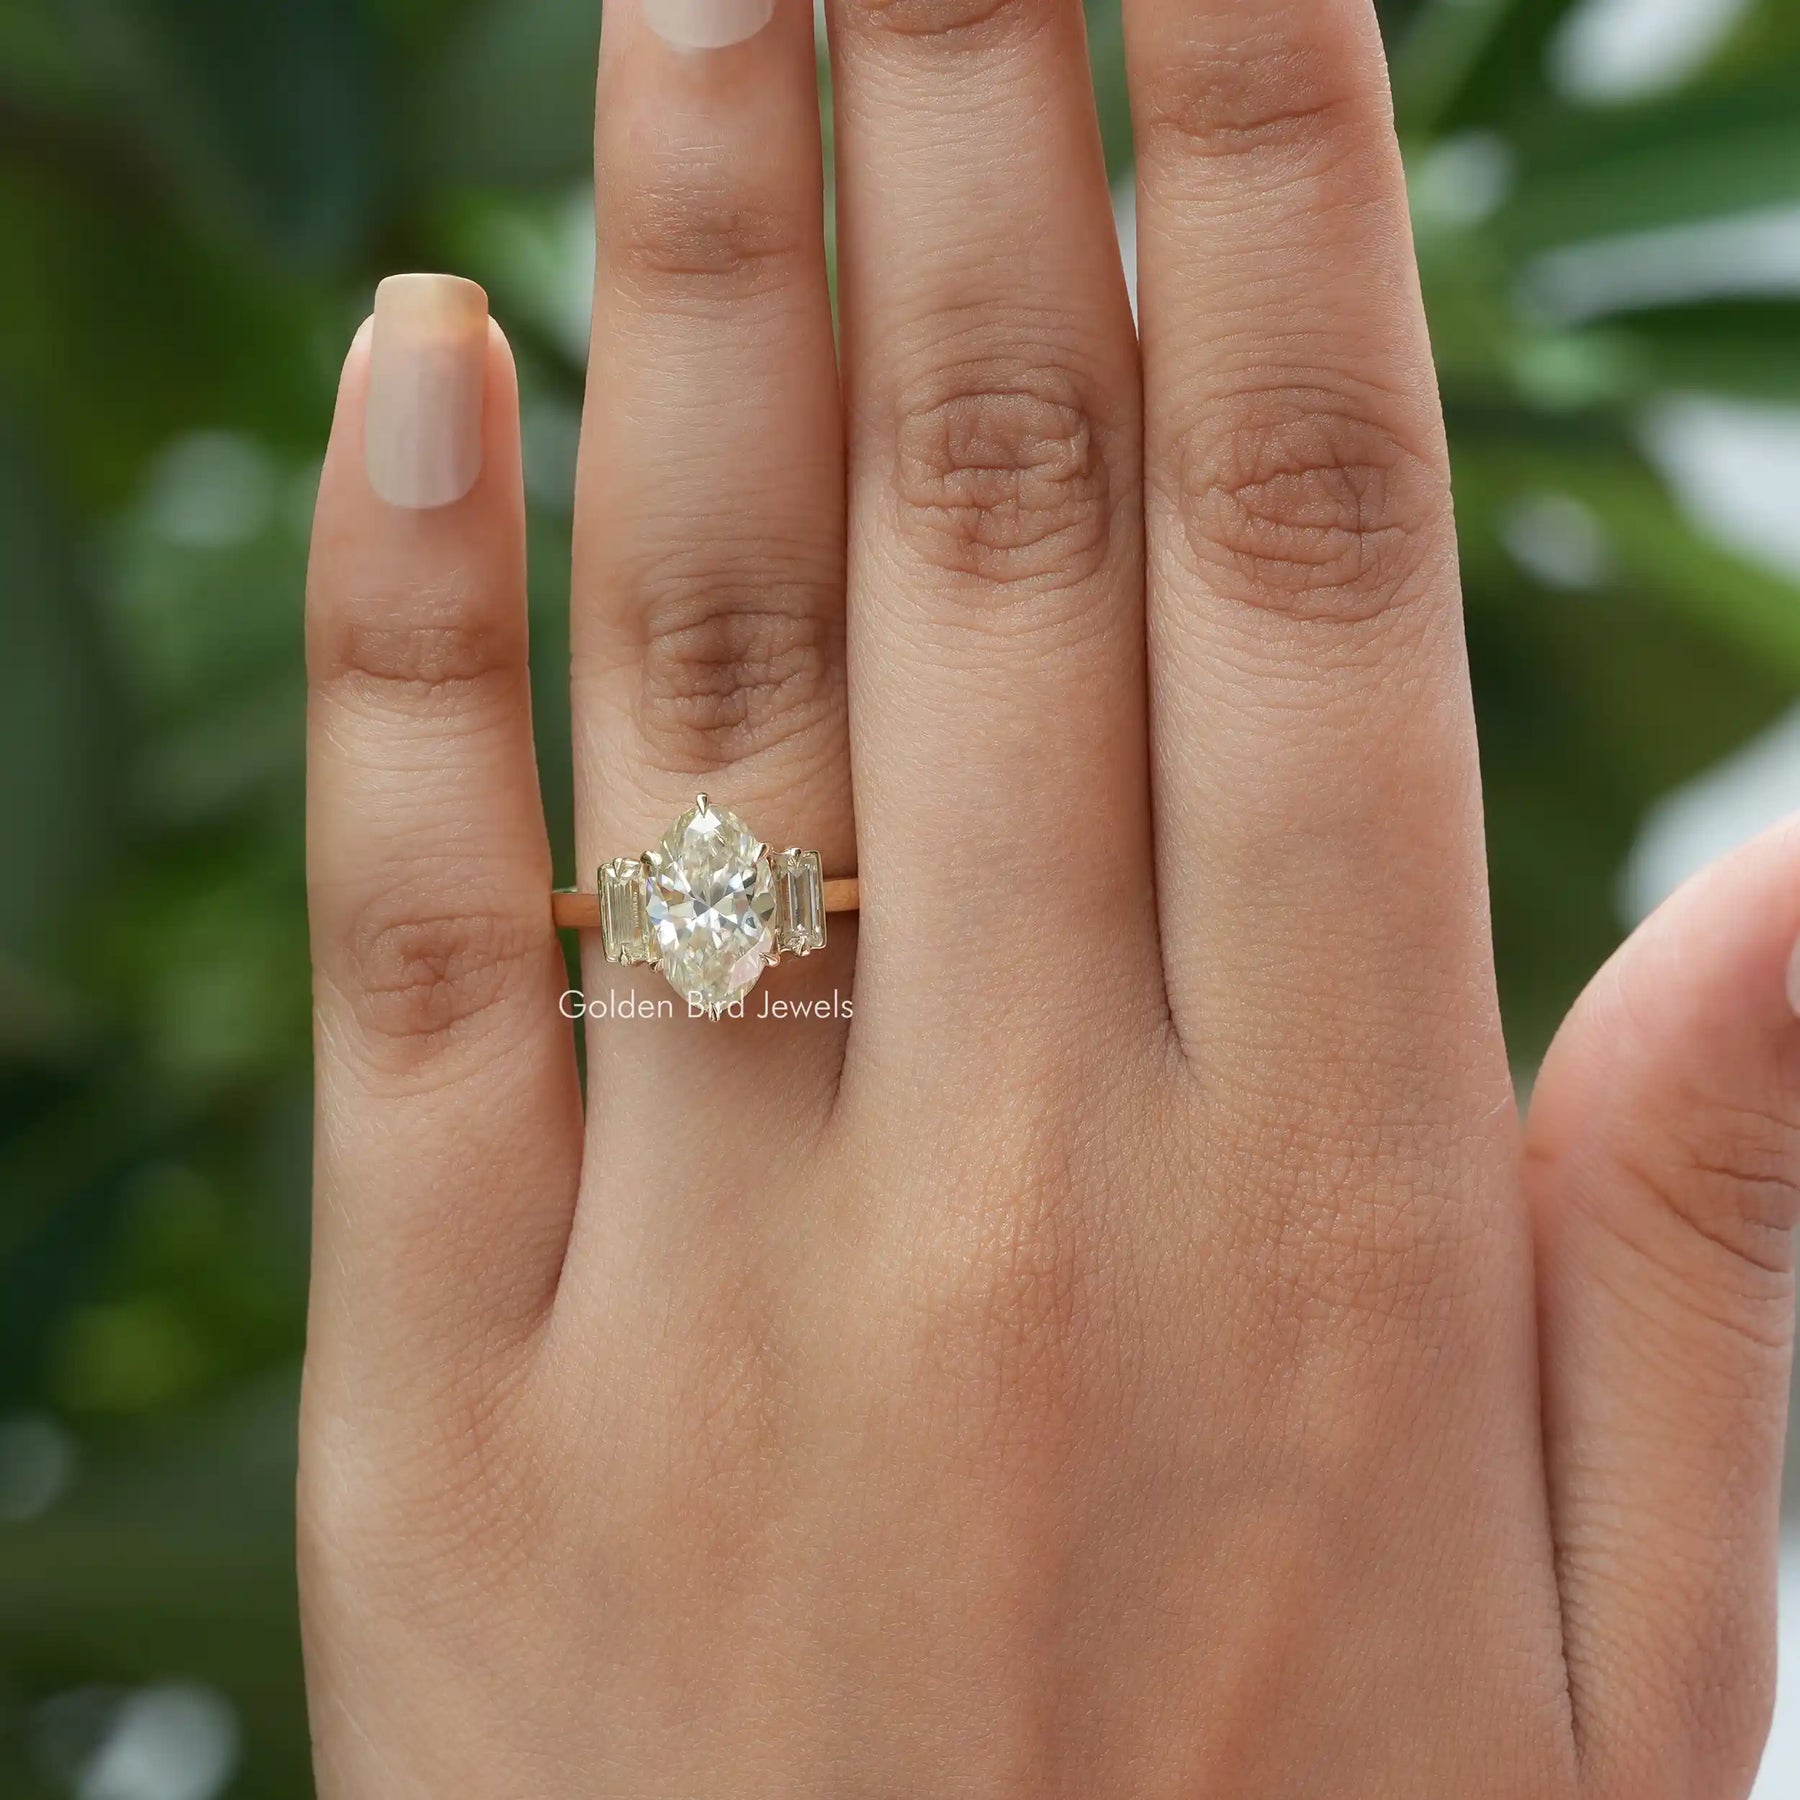 [In Finger Front View Of 3-Stone Moissanite Engagement Ring Made Of Moval Cut Stone]-[Golden Bird Jewels]